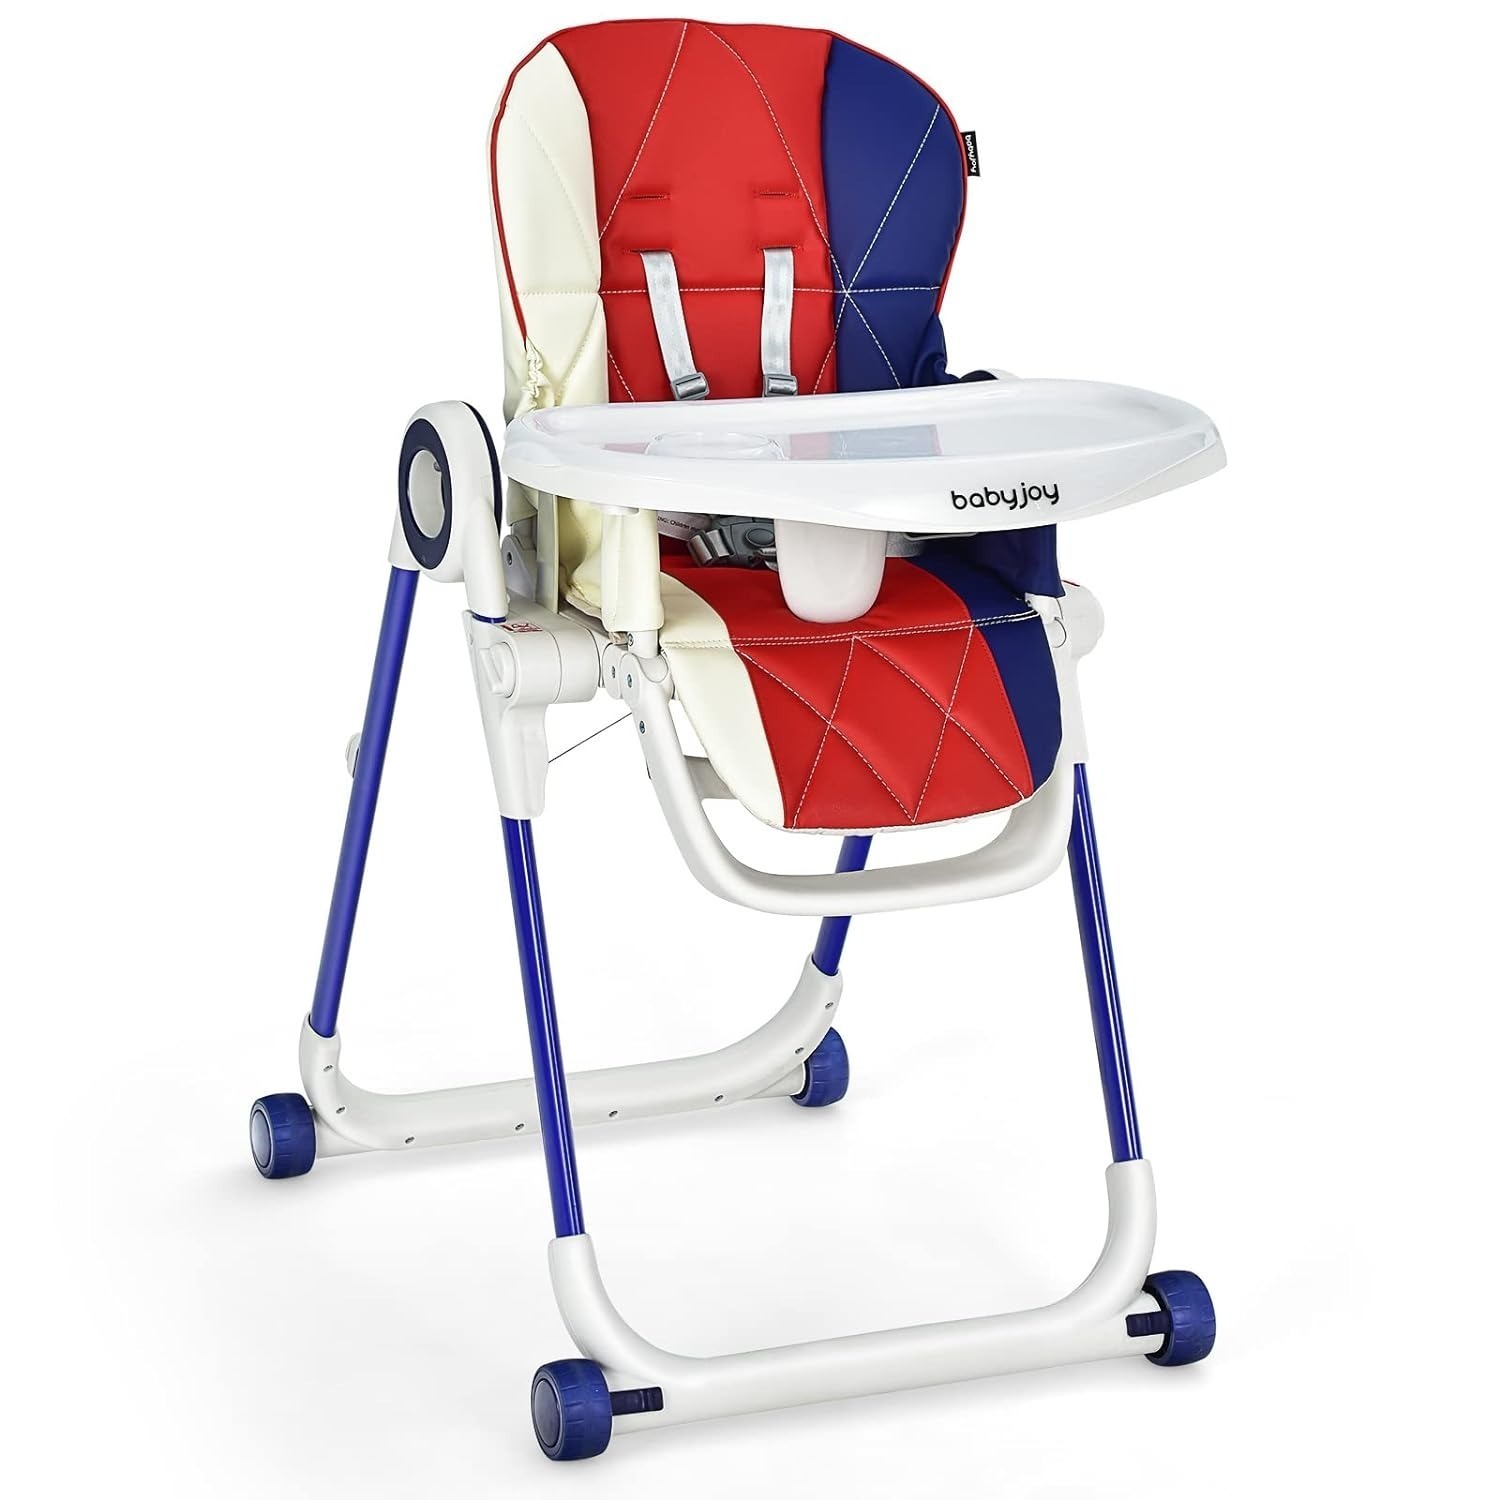 Foldable Baby High Chair w/ Adjustable Backrest, Footrest & Seat Height w/ Lockable Wheels & Removable Trays $60 + Free Shipping